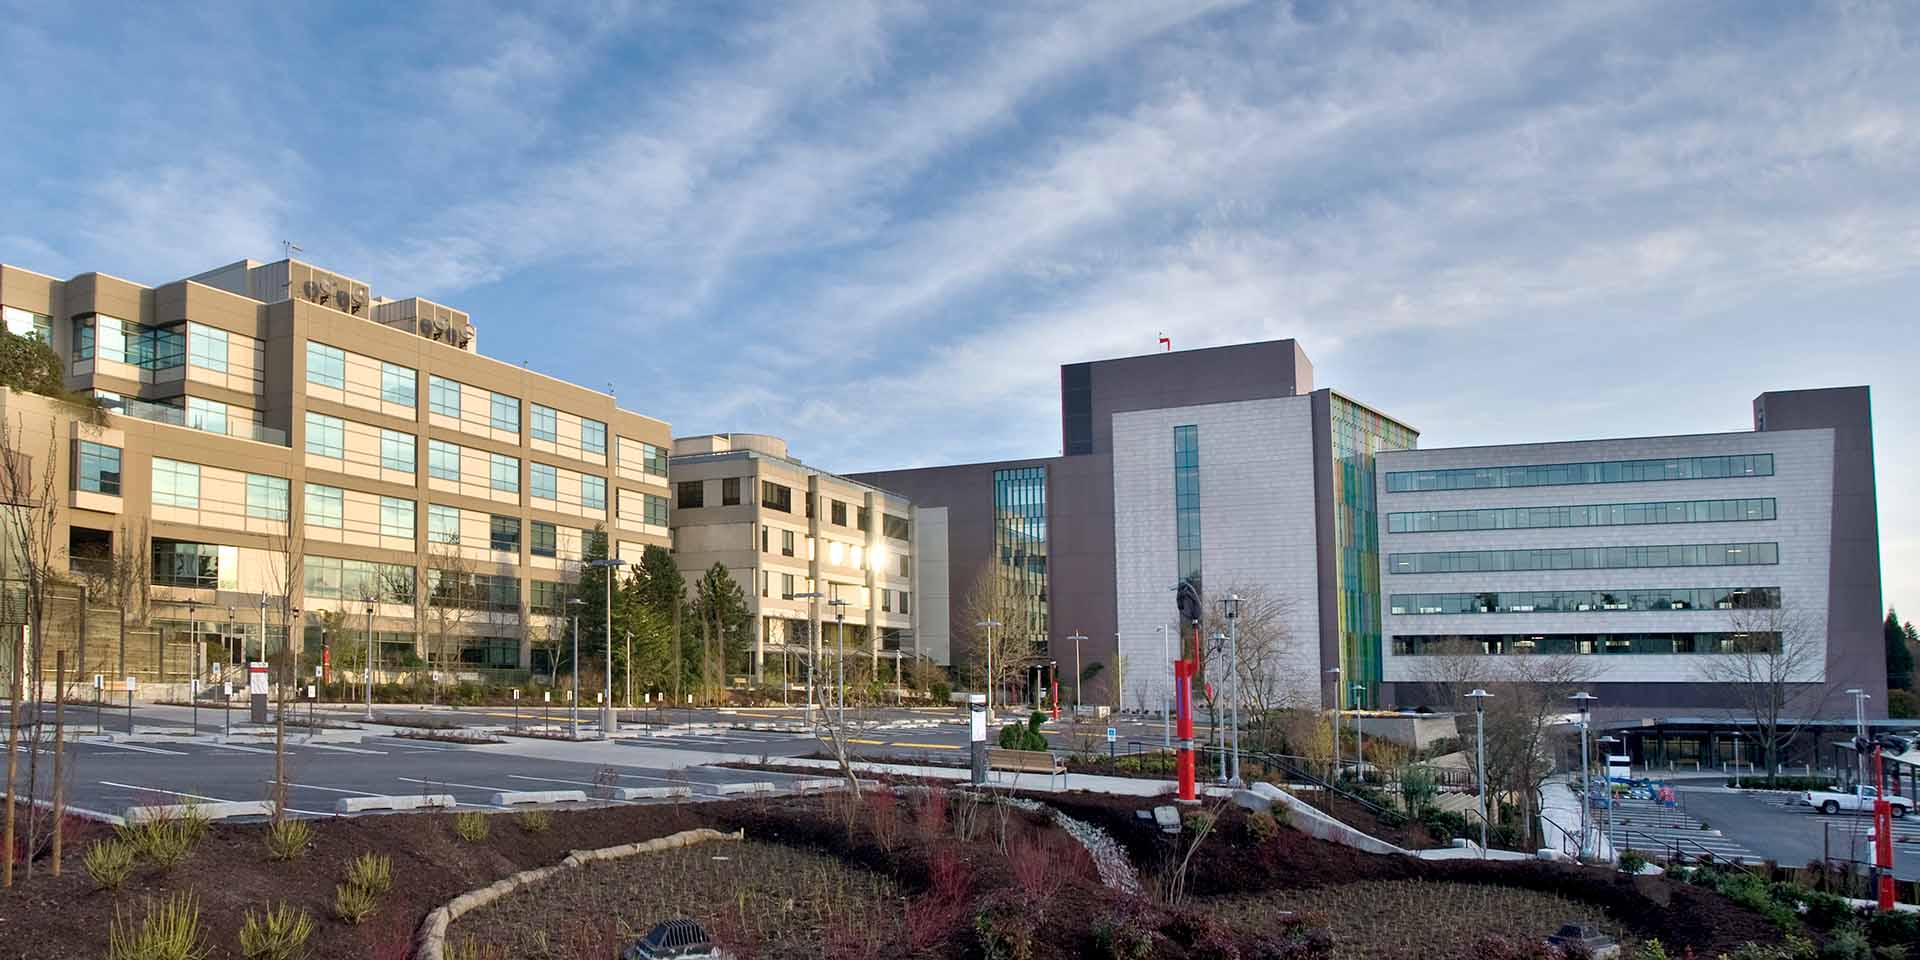 An exterior view of Seattle Children's Hospital